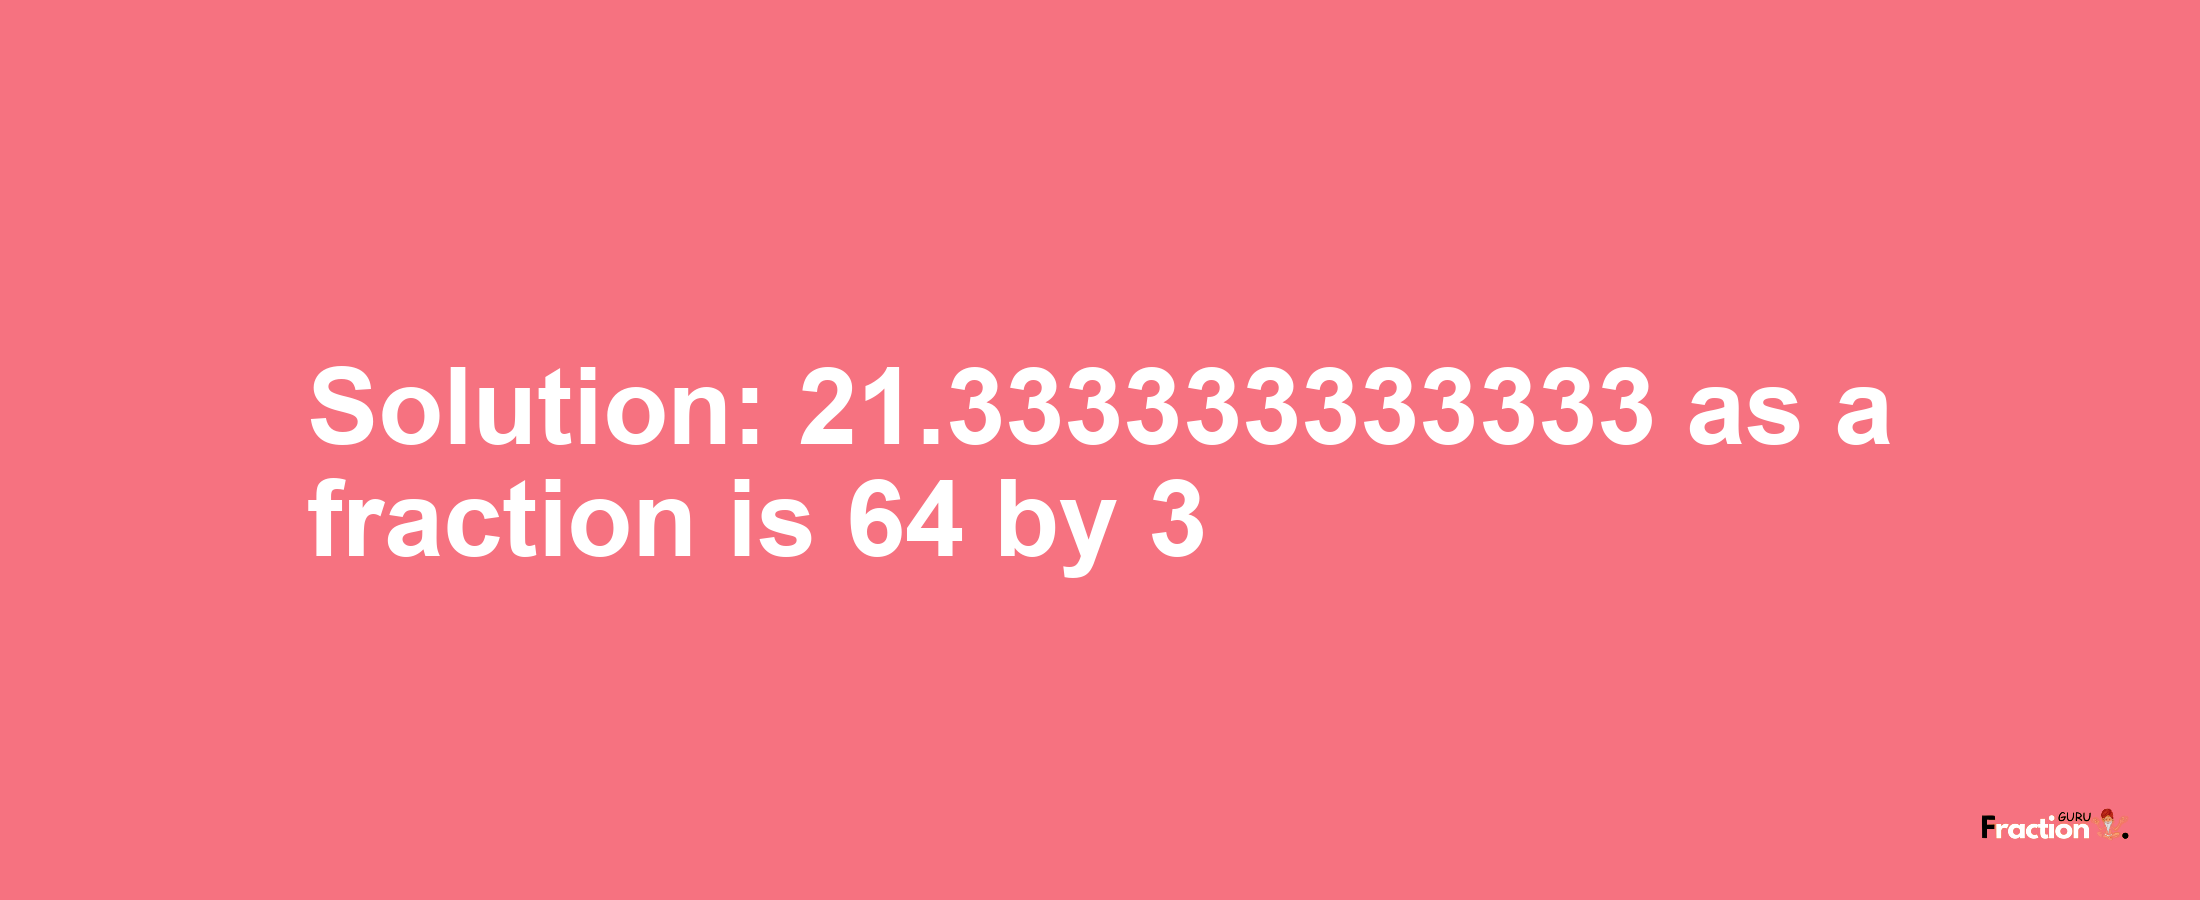 Solution:21.333333333333 as a fraction is 64/3